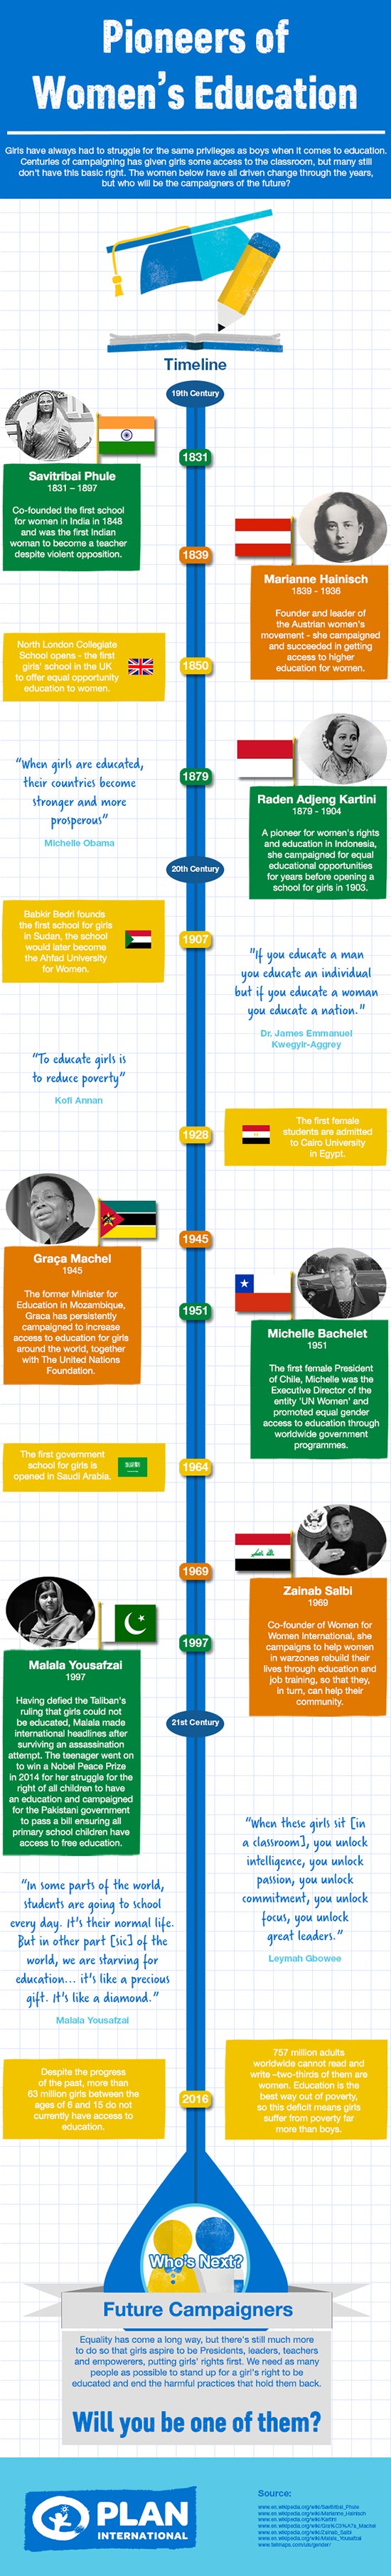 Infographic detailing the pioneers of womens education